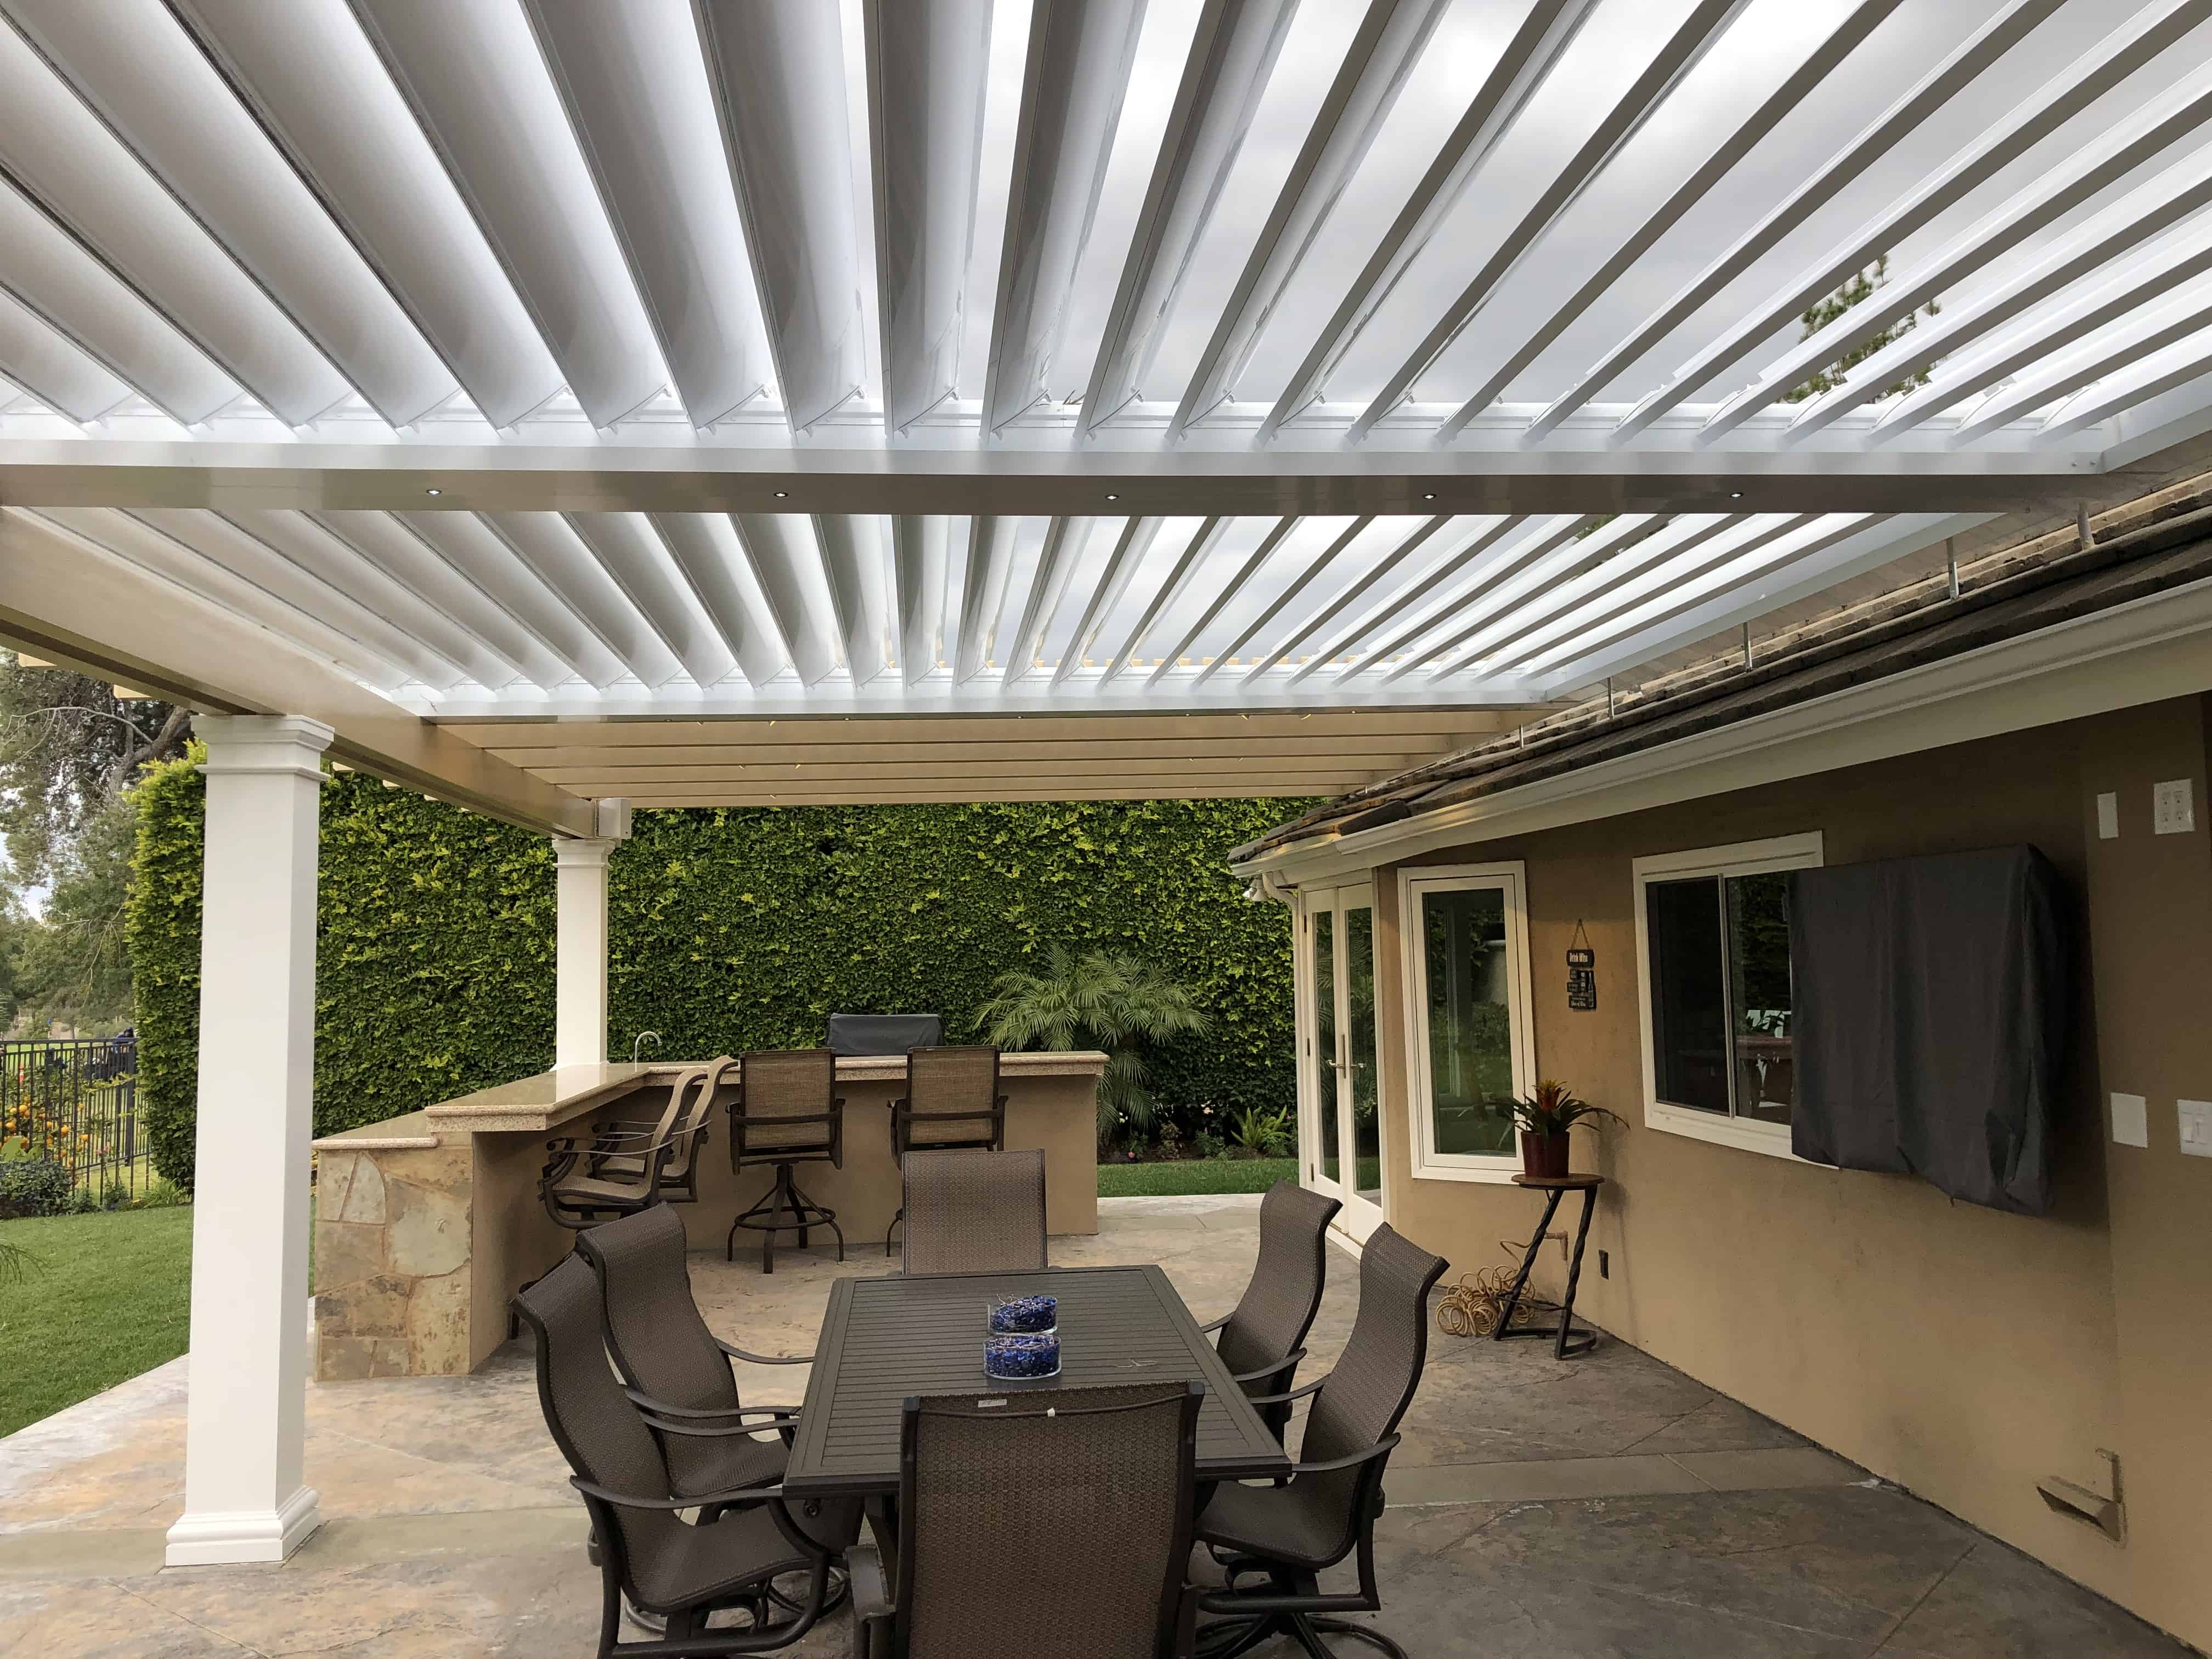 Equinox Louvered Roof System Patio Covers Alumawood Factory Direct Patio Covers